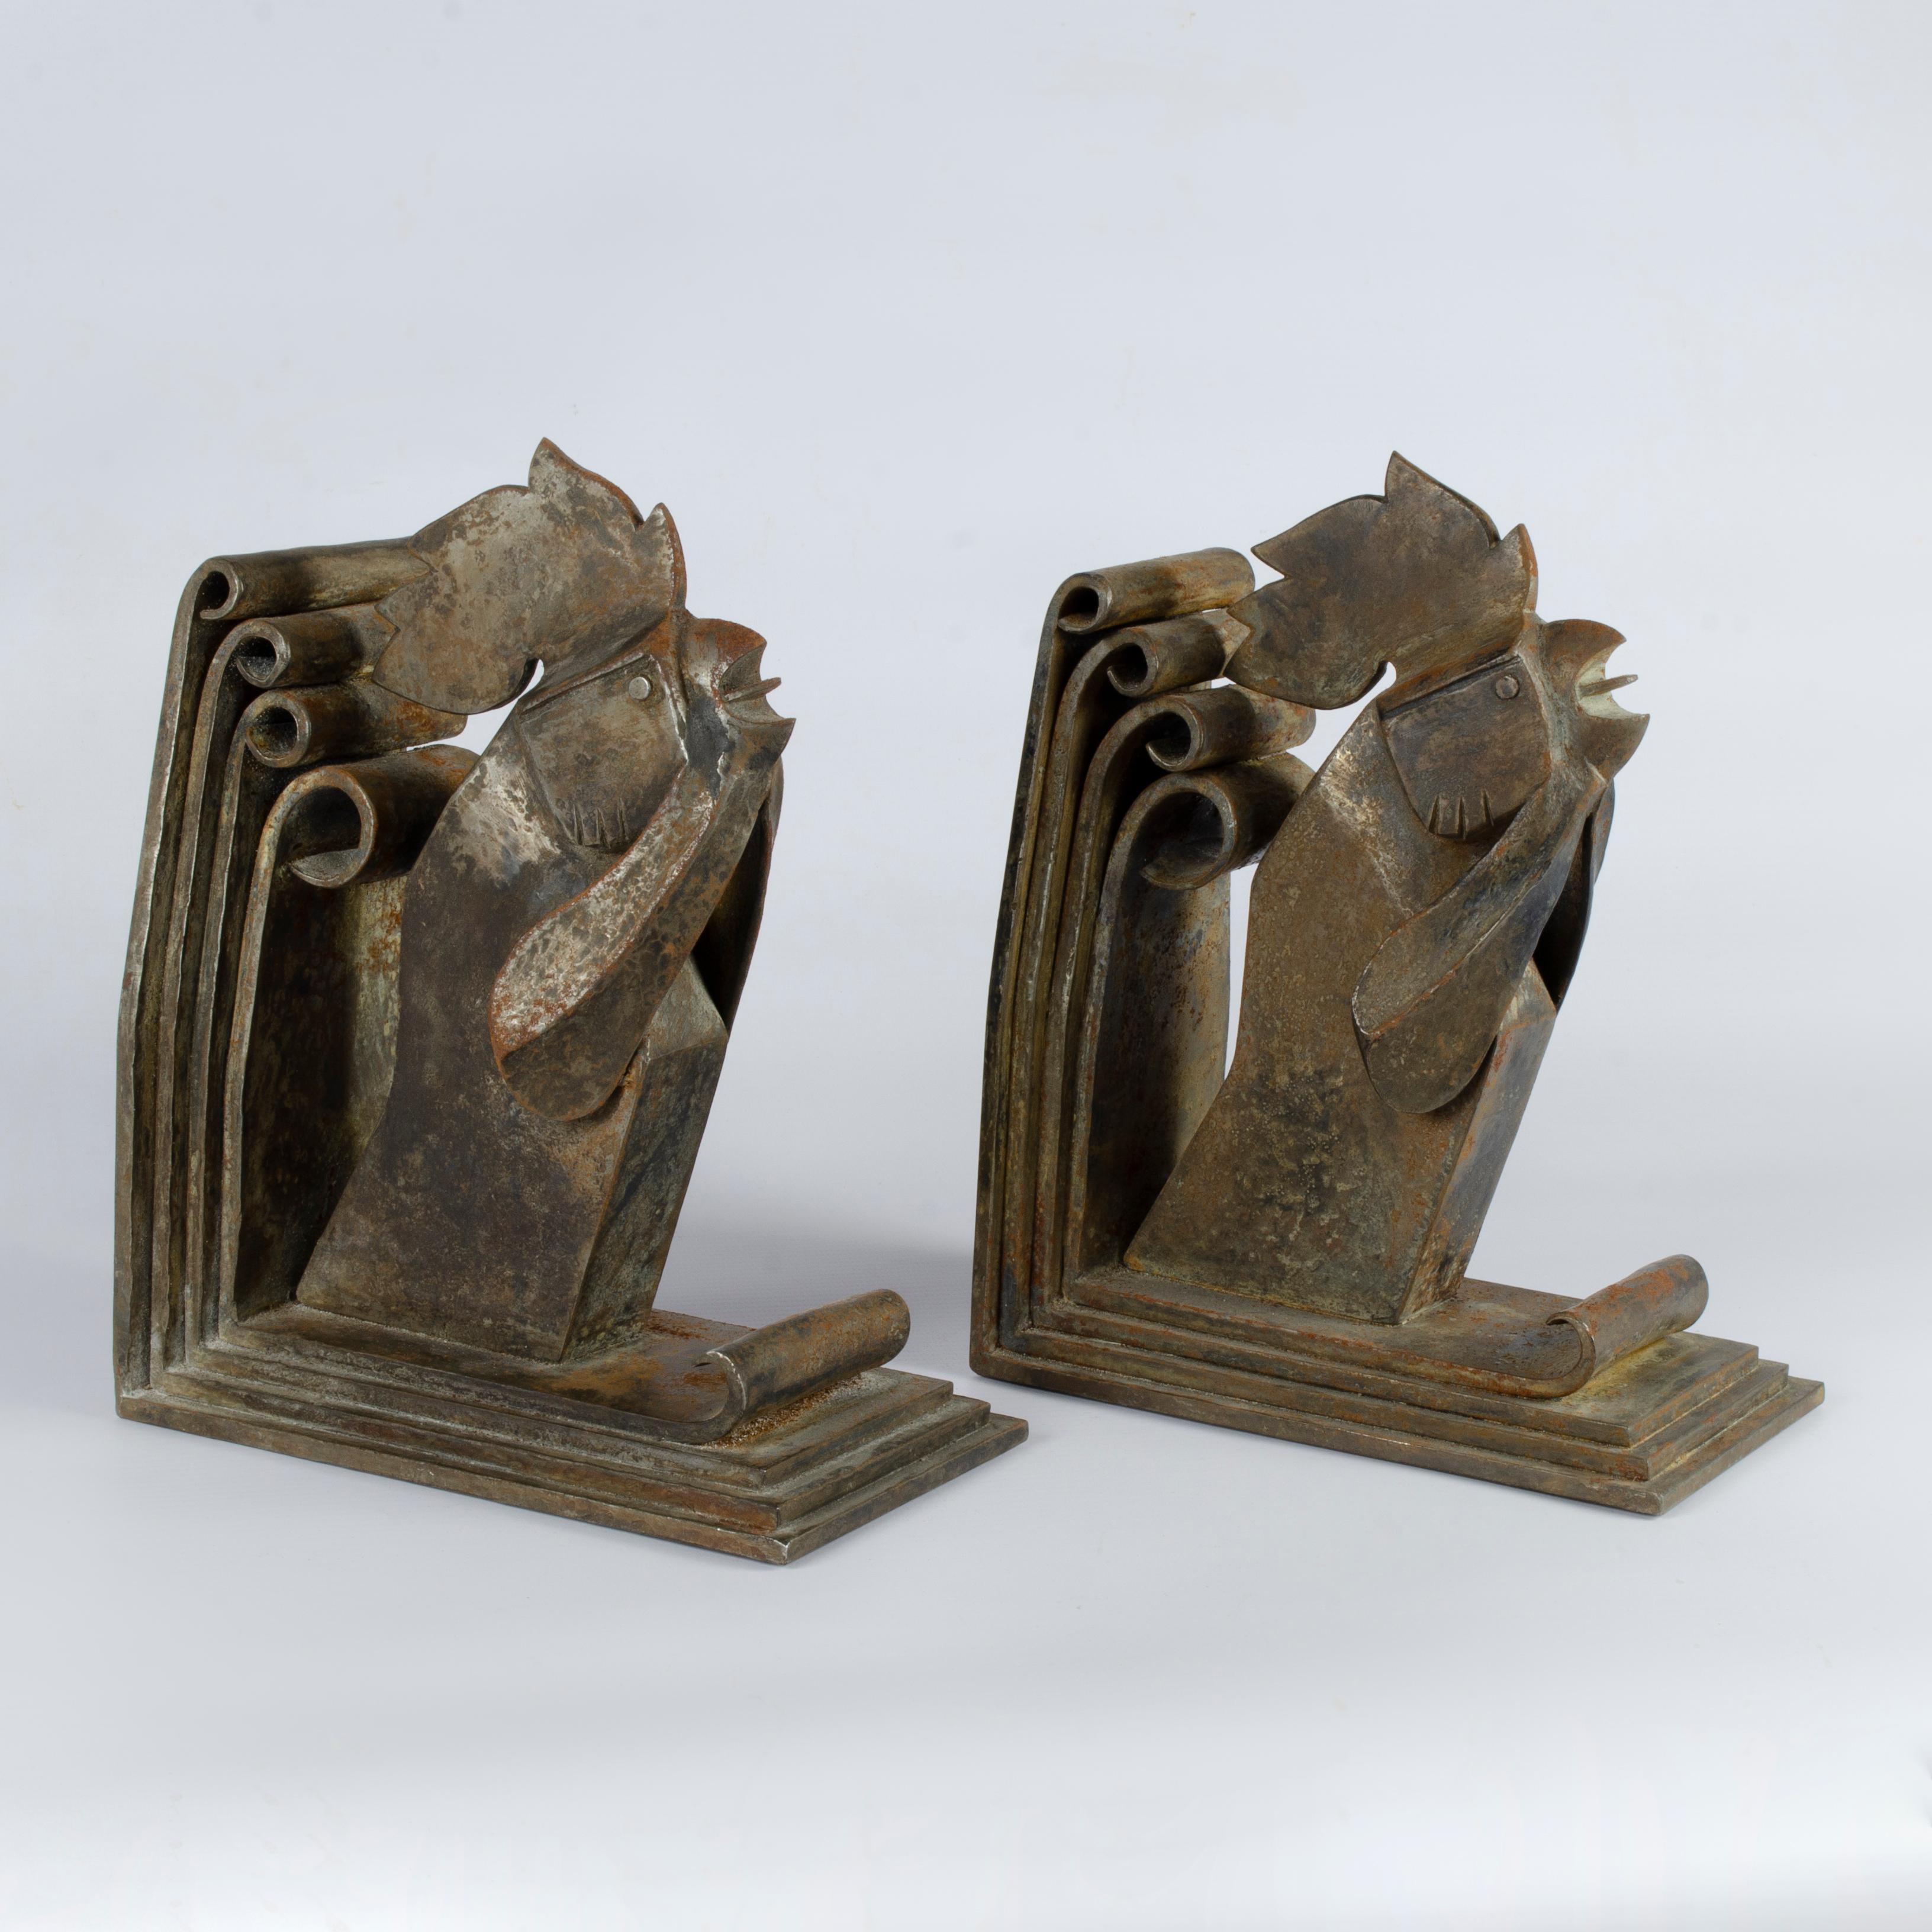 Pair of book presses with a rooster design, made of iron, made by Edgar Brandt (1880 - 1960). Signed E, BRANDT

Reproduced in the books, Joan Kahr, Edgar Brandt: Art Deco Ironwork, New York, 2010, p. 143
Joan Kahr, Edgar Brandt: Master of Art Deco